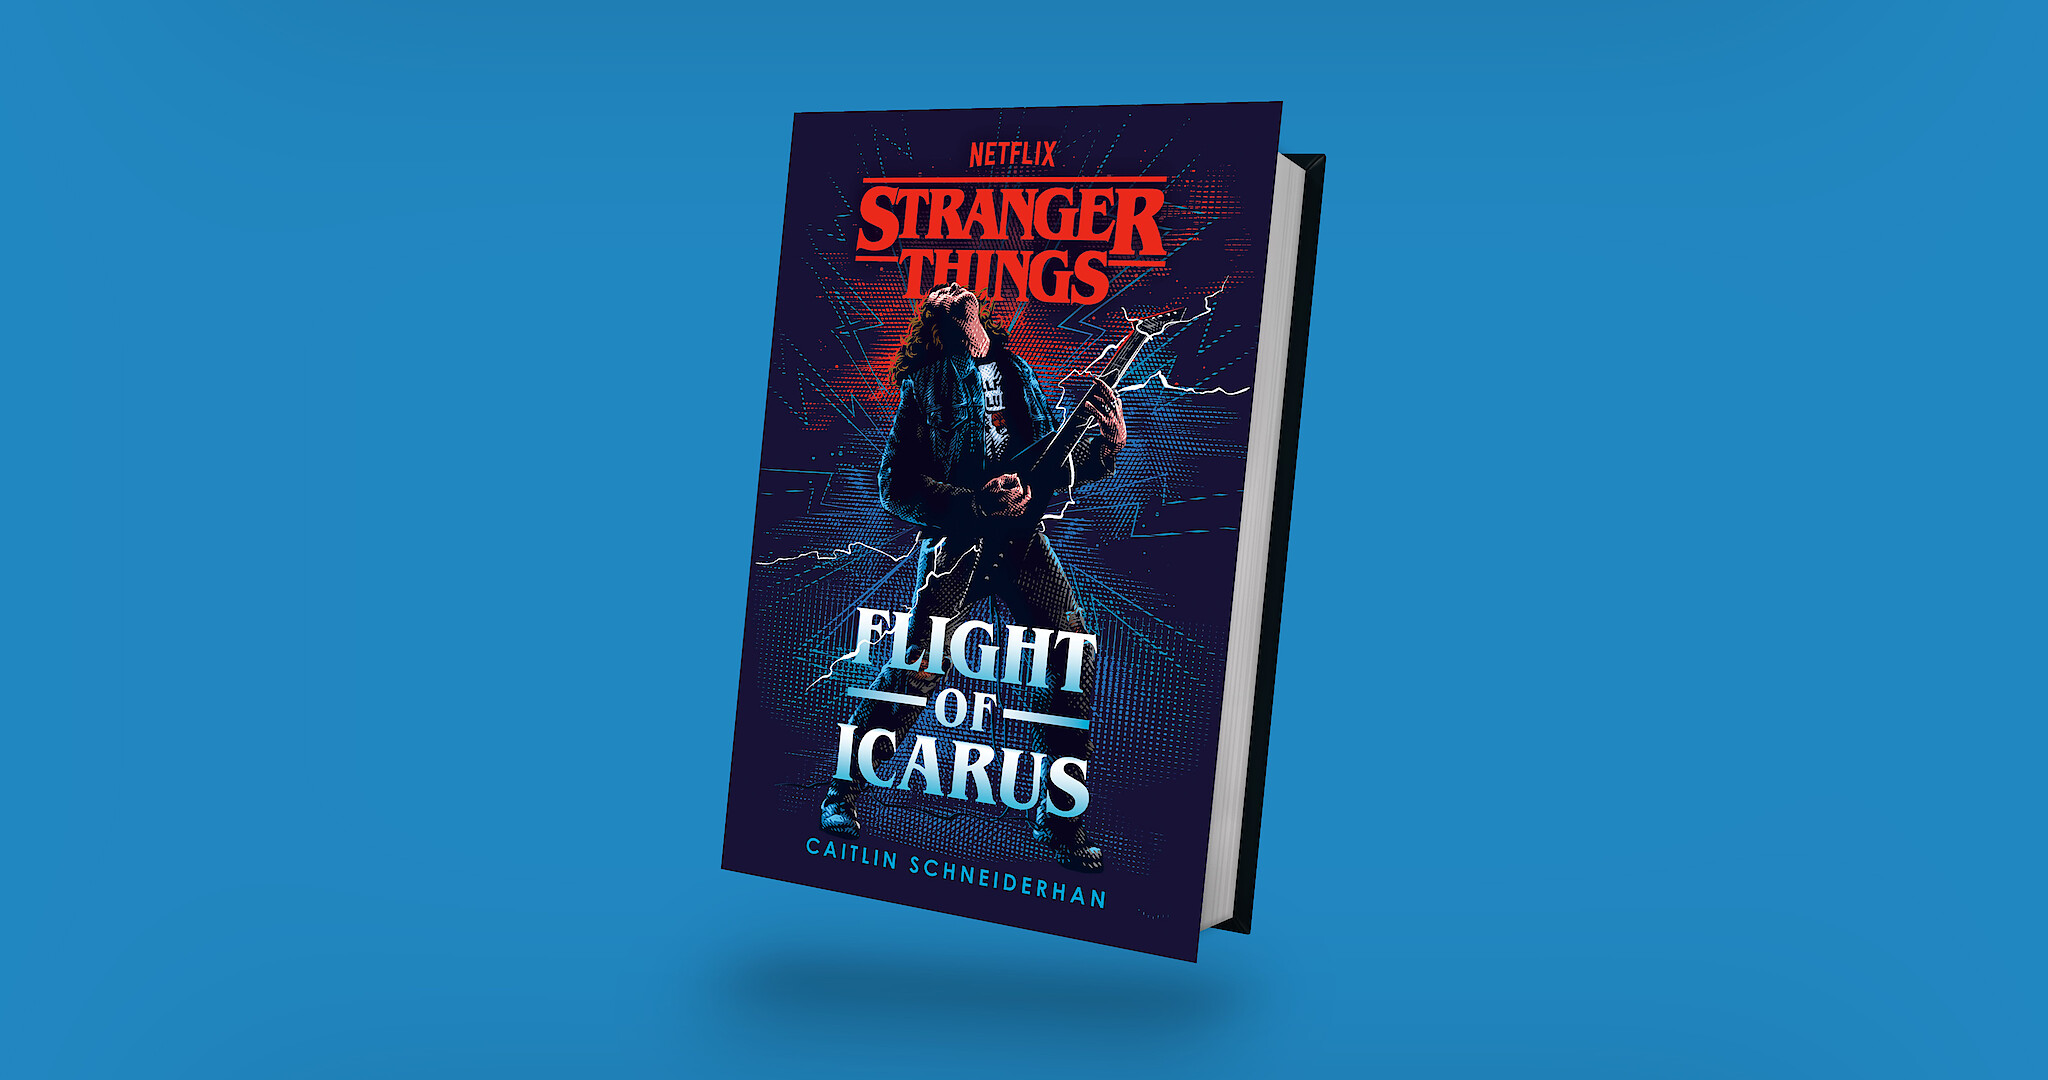 Meet Eddie Munson's Dad in This Excerpt from the New 'Flight of Icarus'  Novel - Netflix Tudum